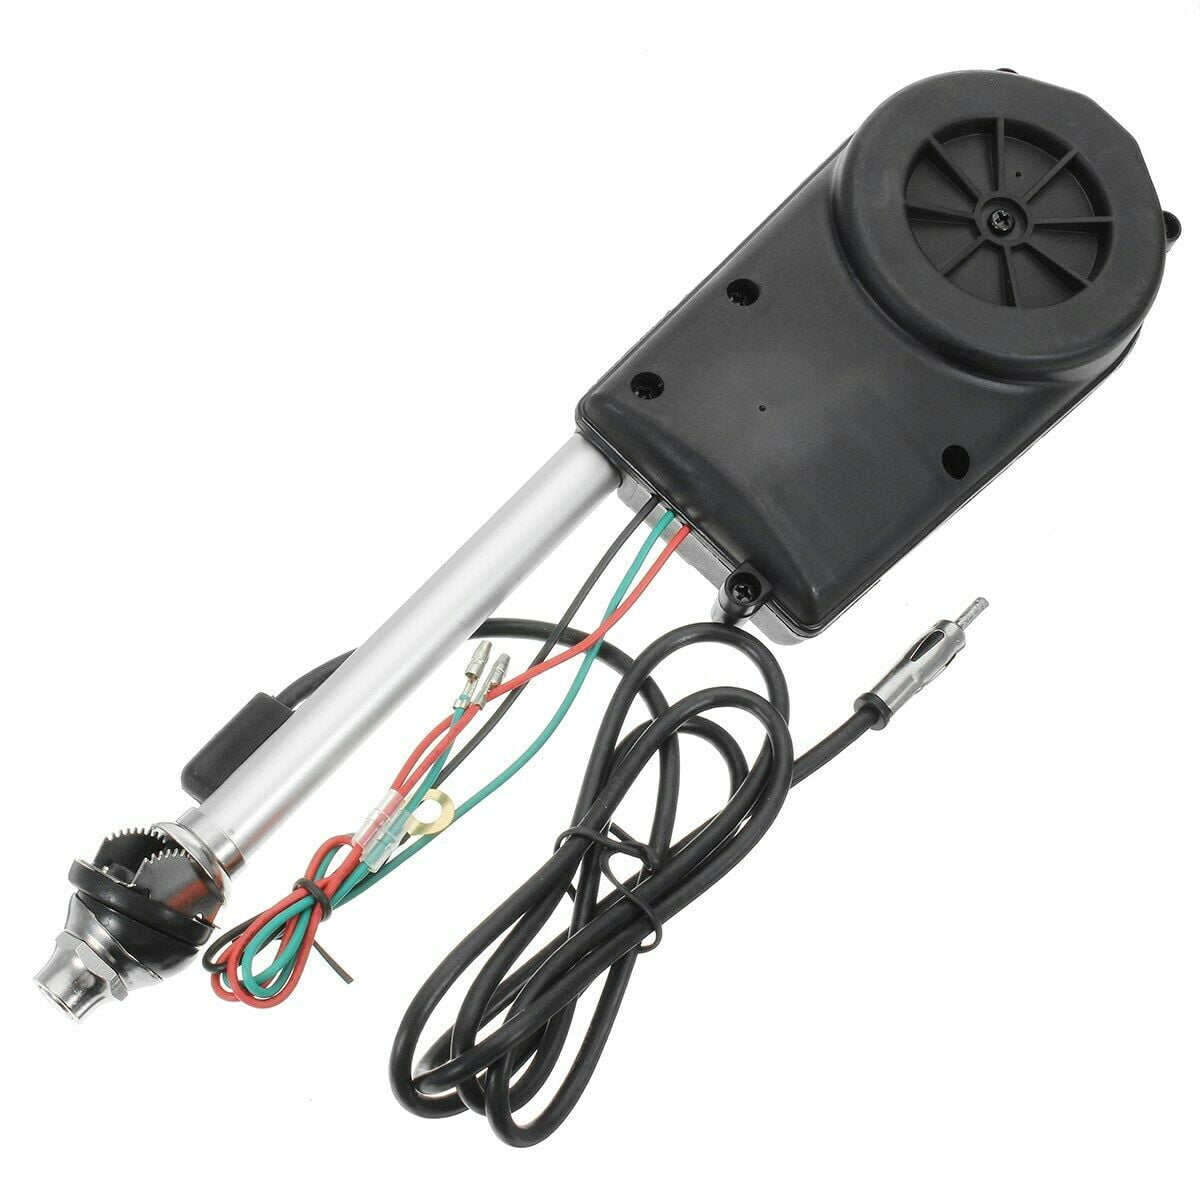 power booster for tv antenna